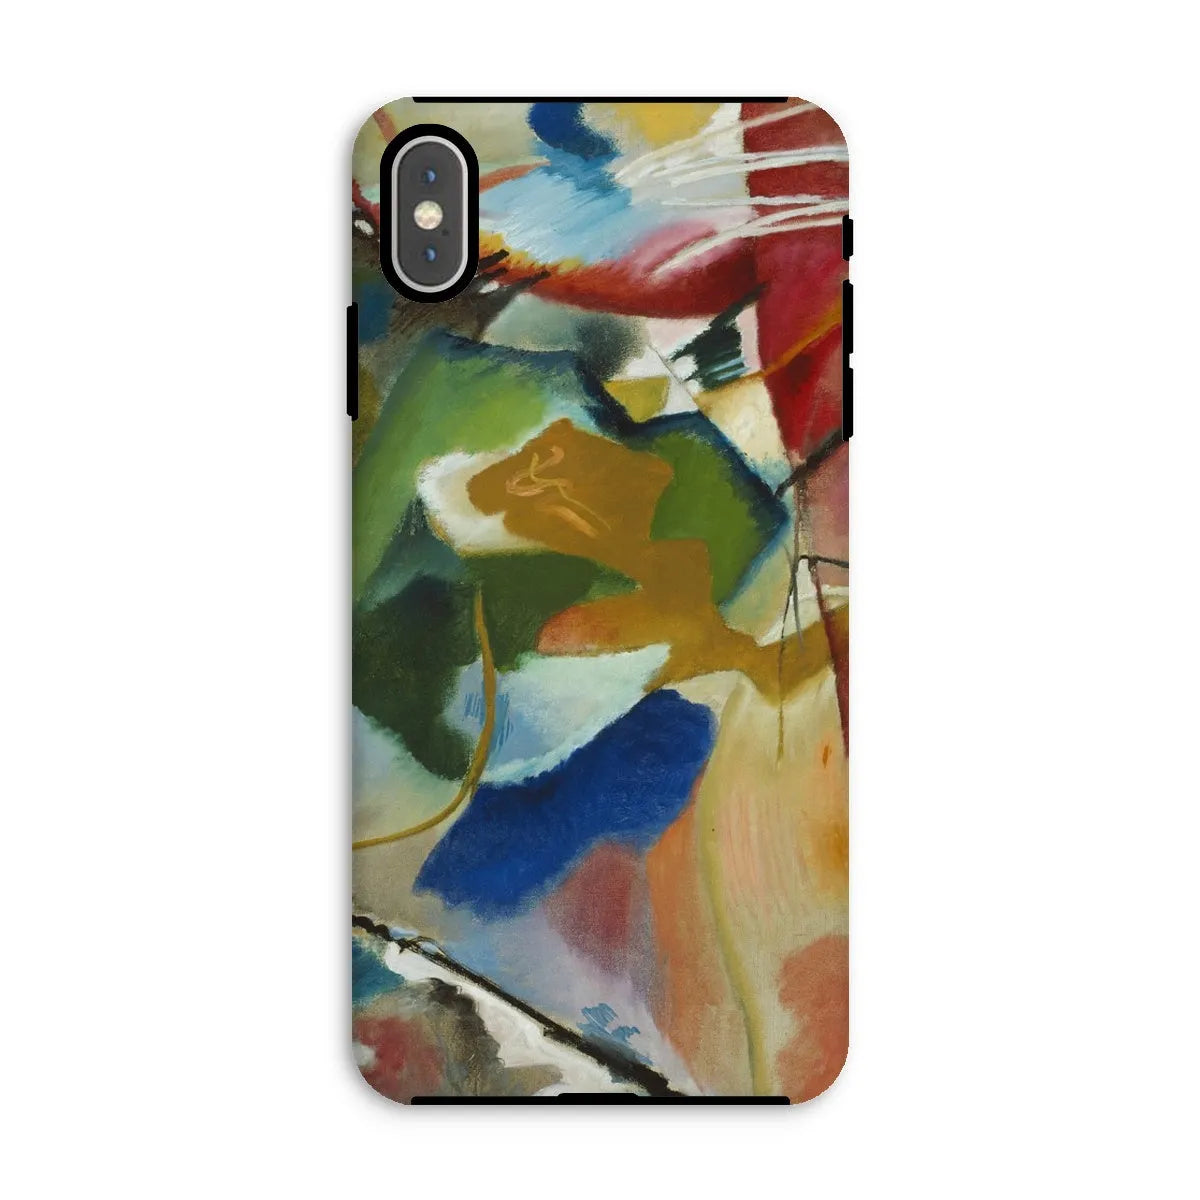 Painting With Green Center Art Phone Case - Wassily Kandinsky - Iphone Xs Max / Matte - Mobile Phone Cases - Aesthetic